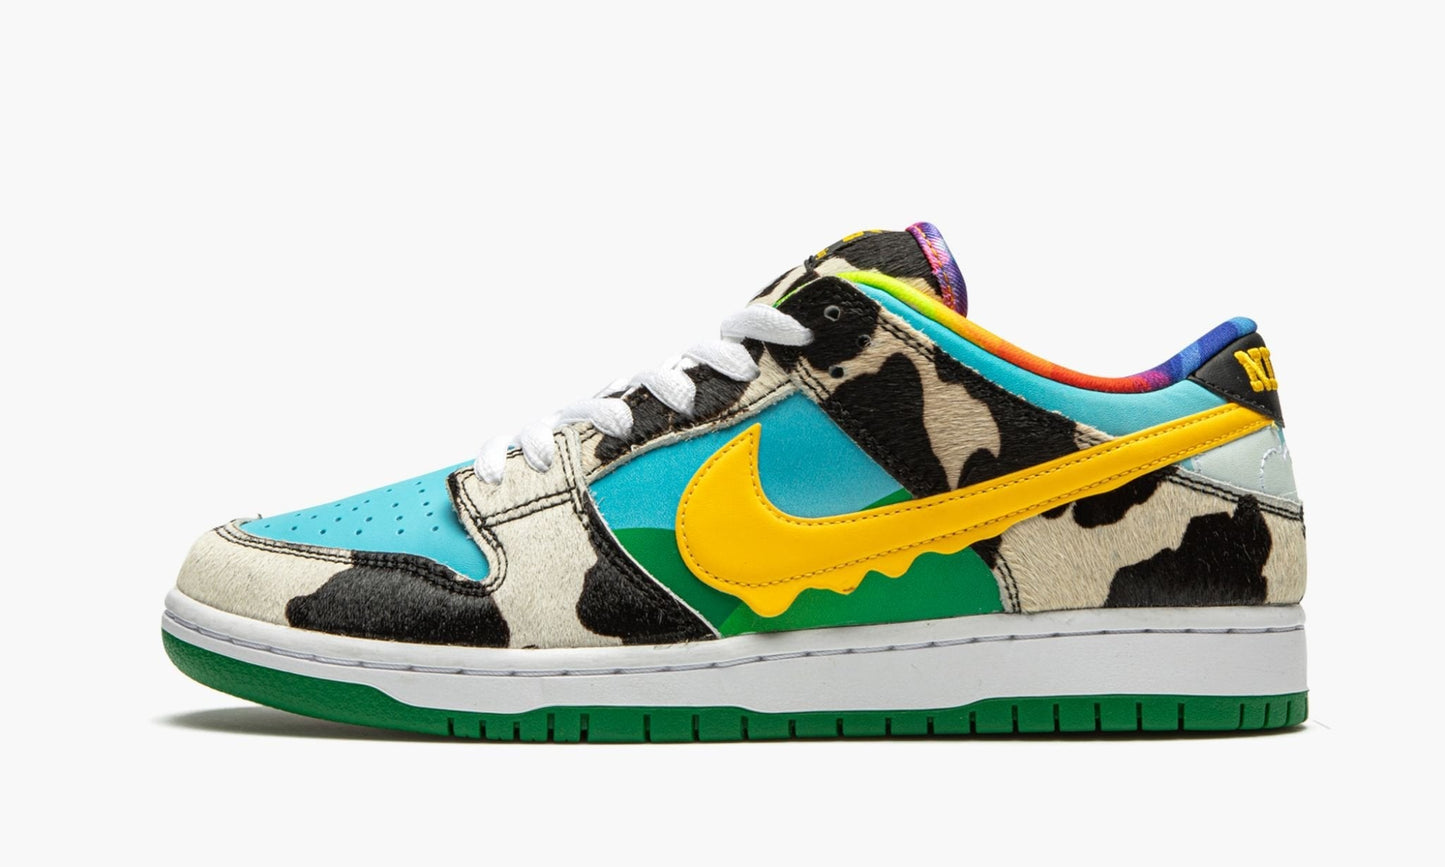 SB Dunk Low Special Box "Ben & Jerry's - Chunky Dunky"